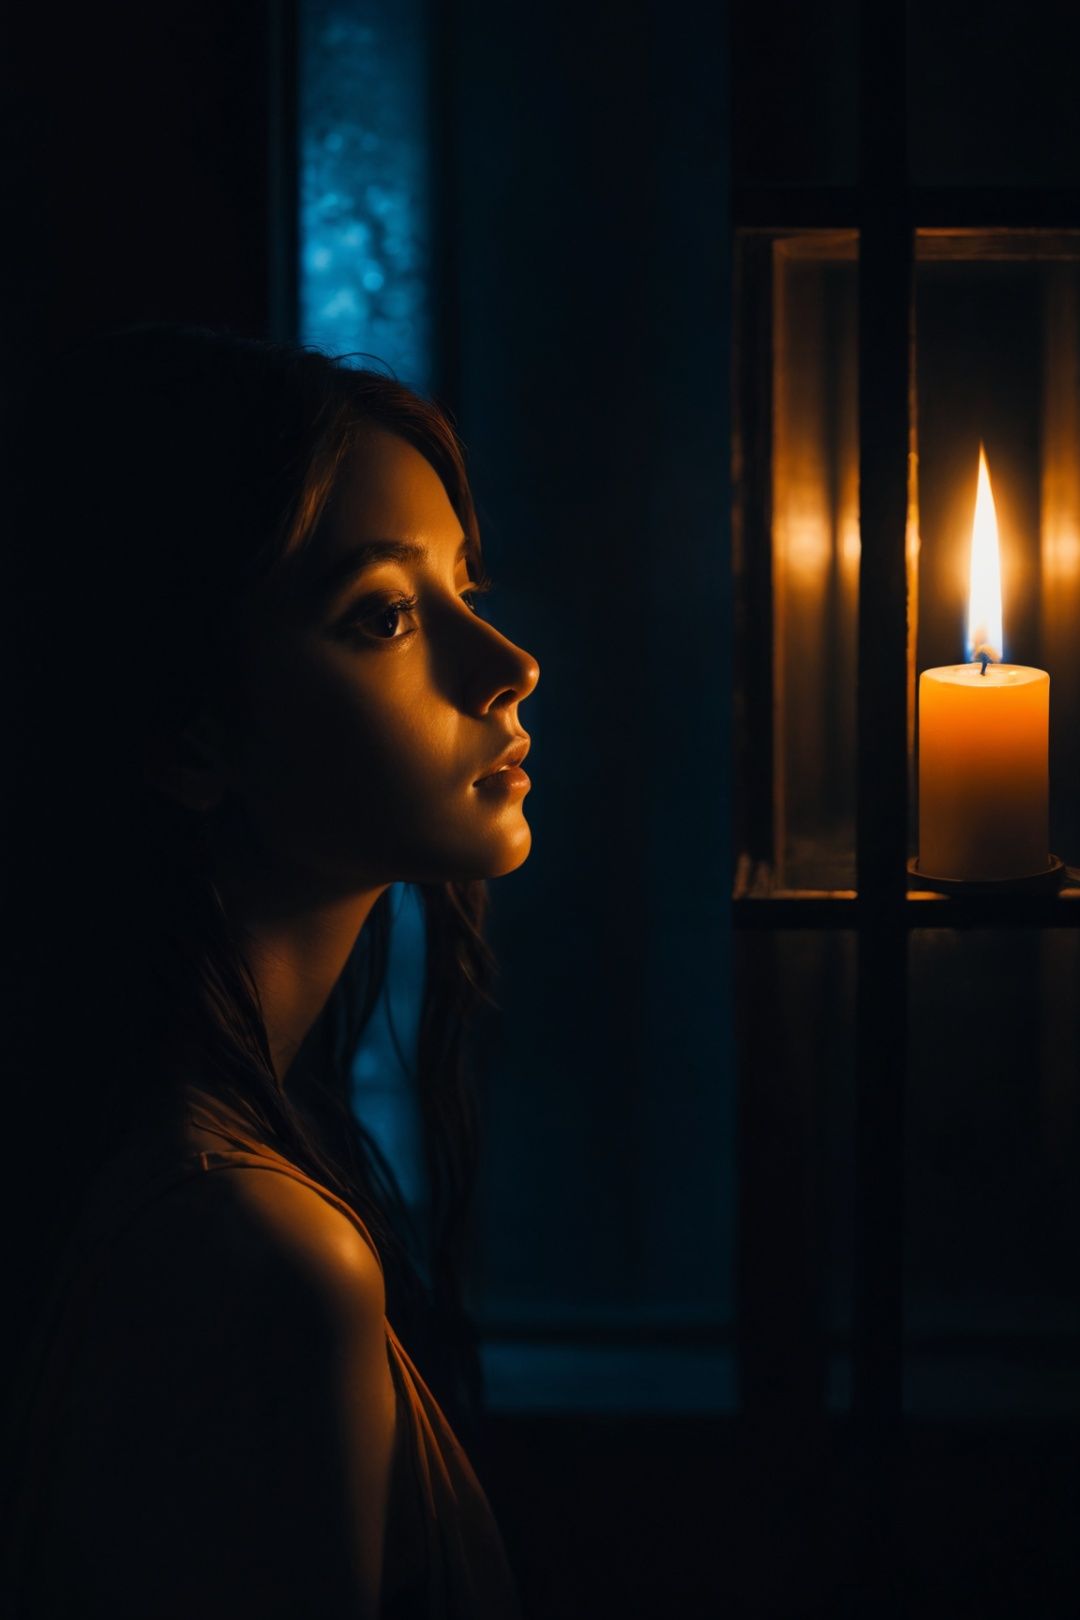  dark theme,black theme,In the dark room, through the window, one can see a girl holding a candle holder outside, and the faint light of the candle reflects the girl's face,blue and orange,light master